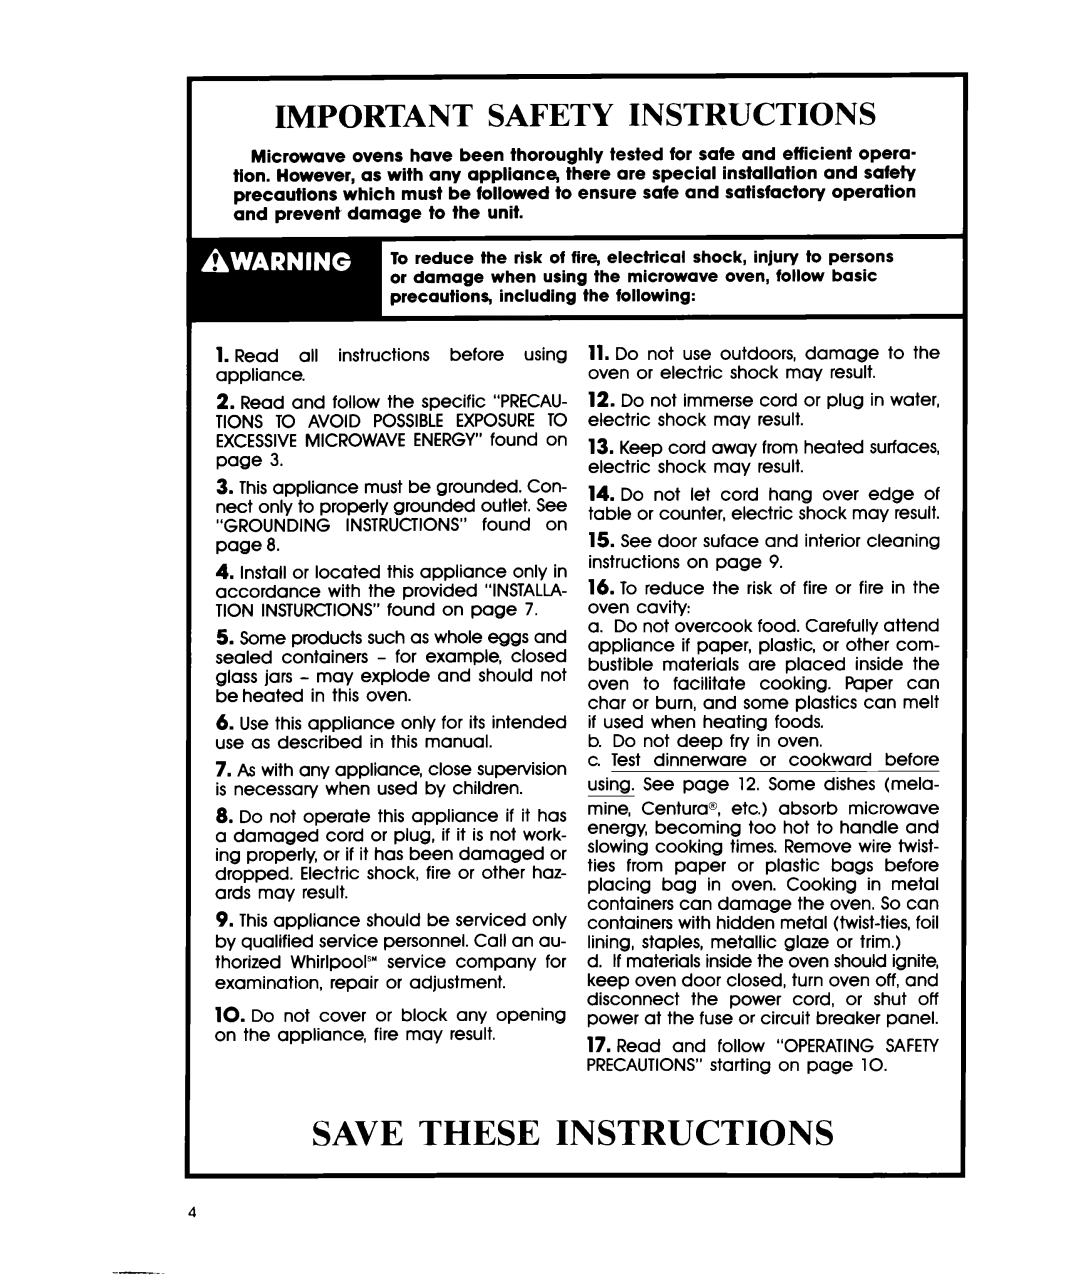 Whirlpool MWIOOOXW manual Save These Instructions, Important Safety Instructions 